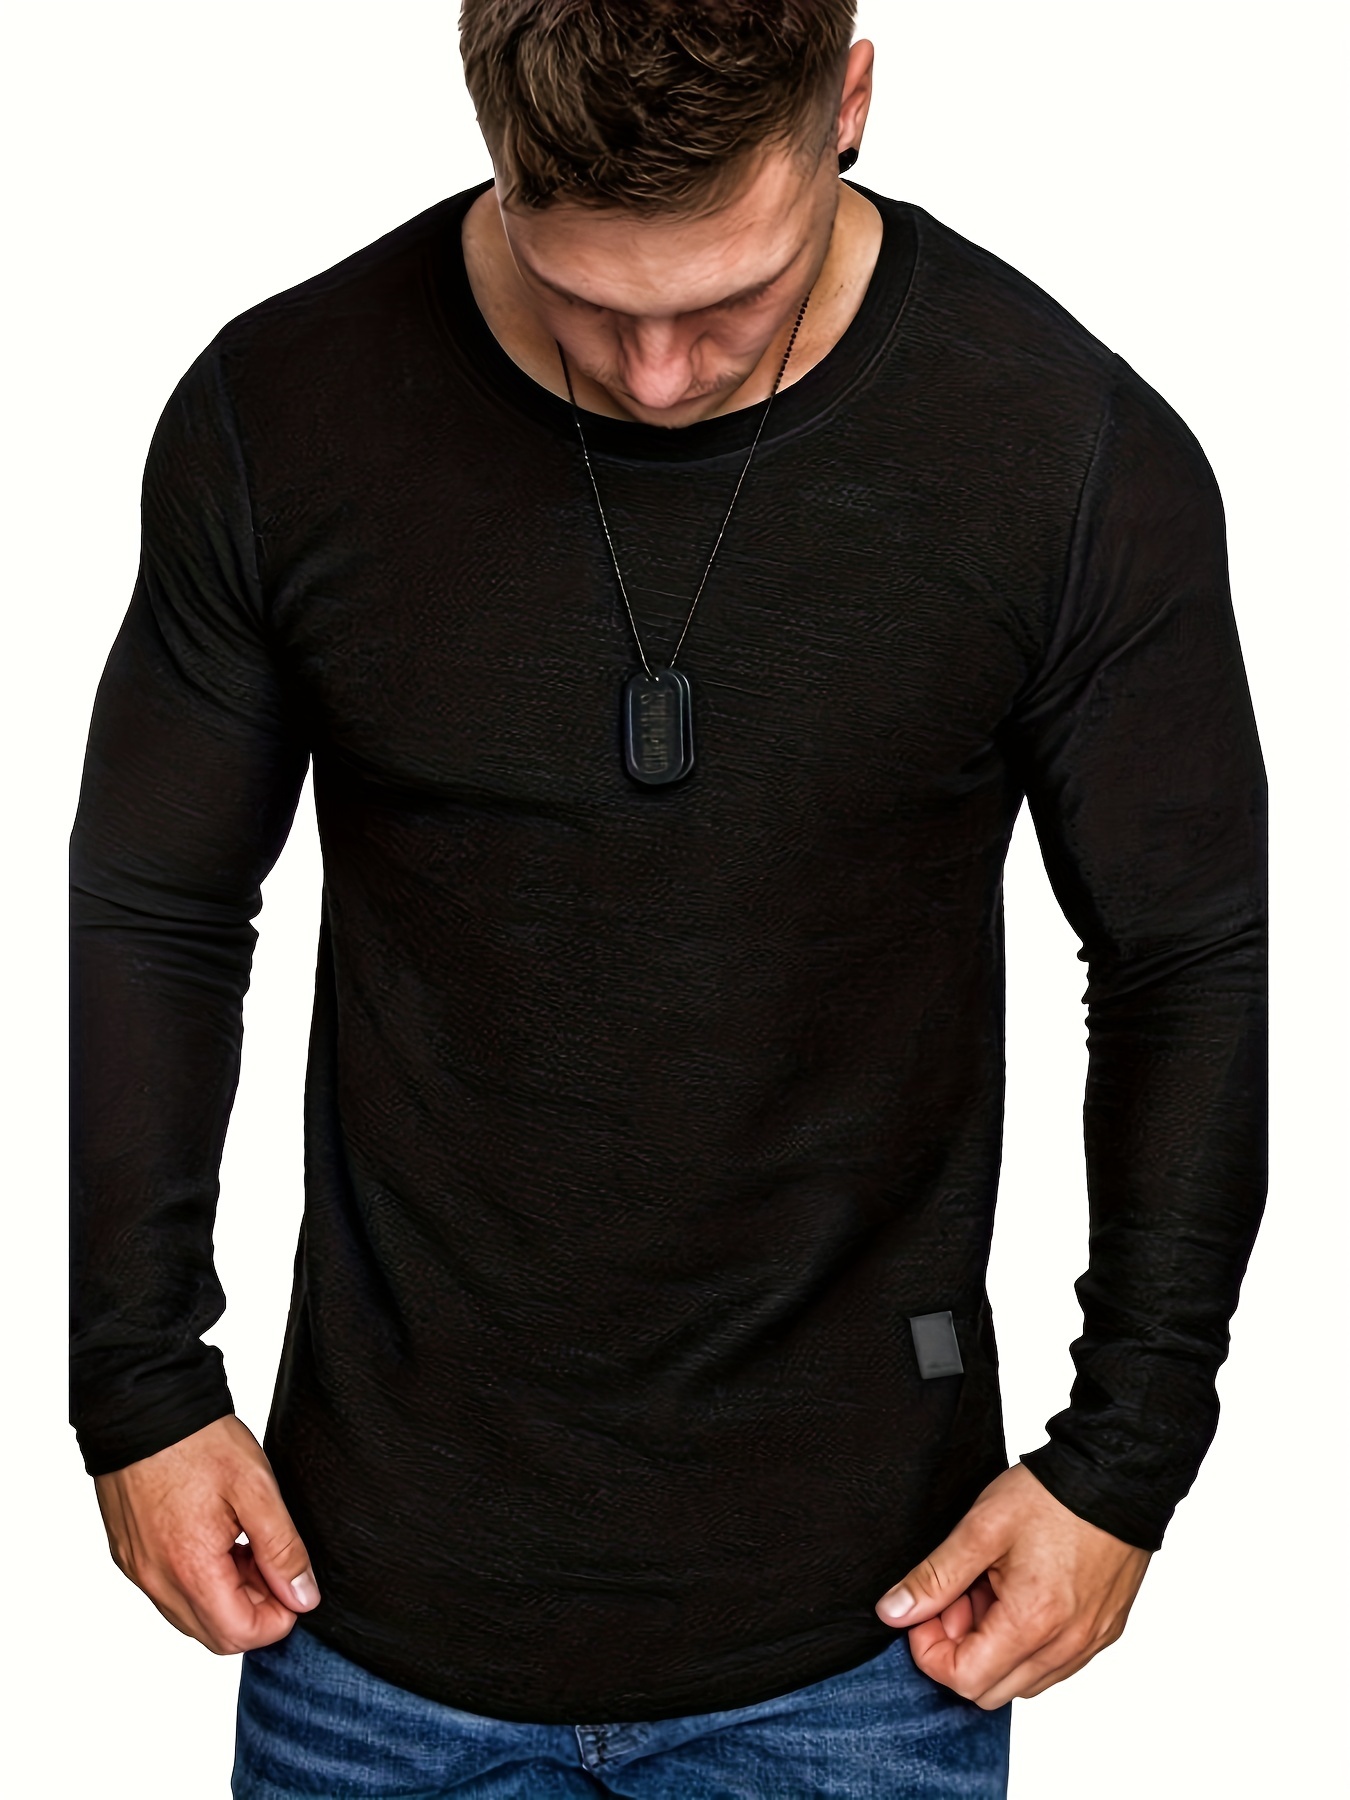 Gym T-Shirts & Tops, Training Tops, Fitness T-Shirts